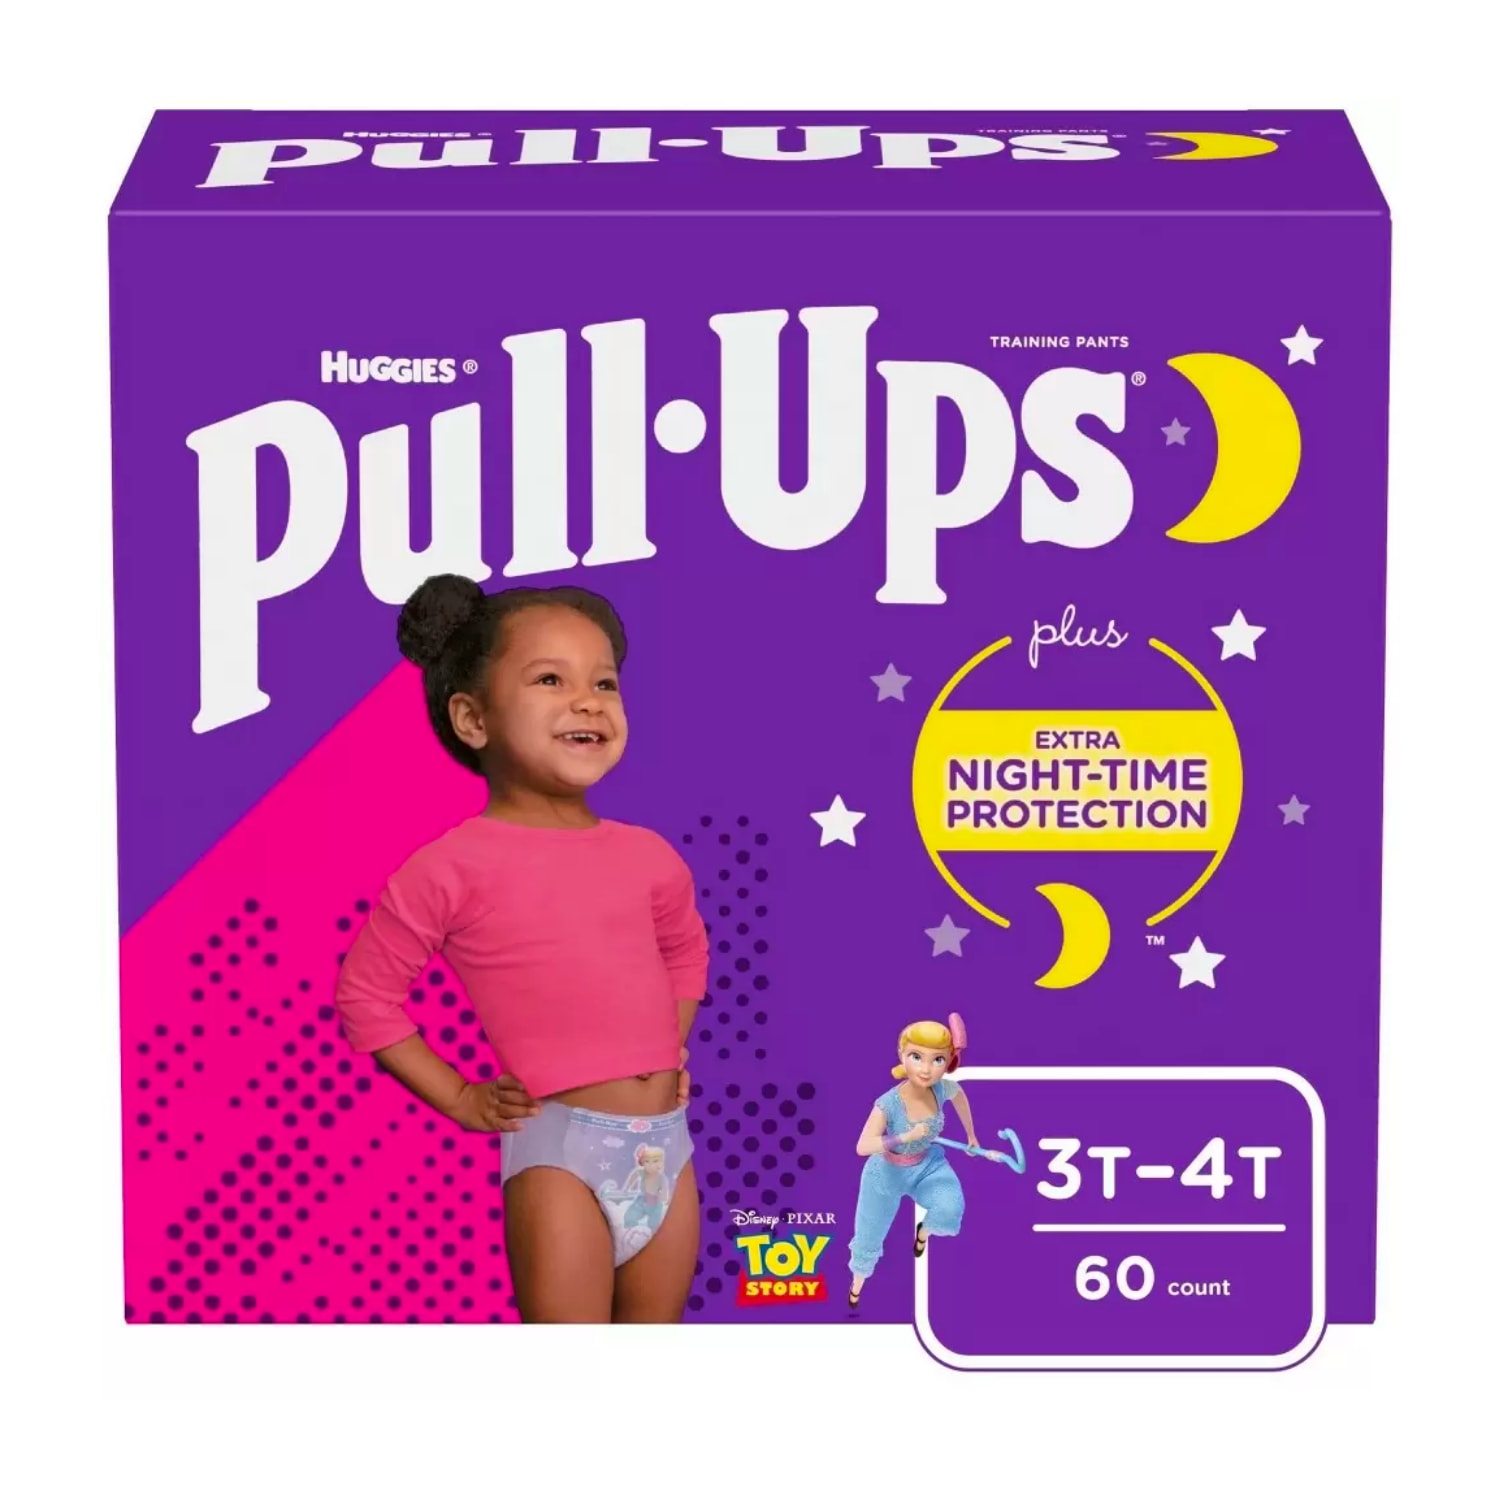 Huggies Pull-Ups Night-Time Training Pants for Girls (Size 3T-4T